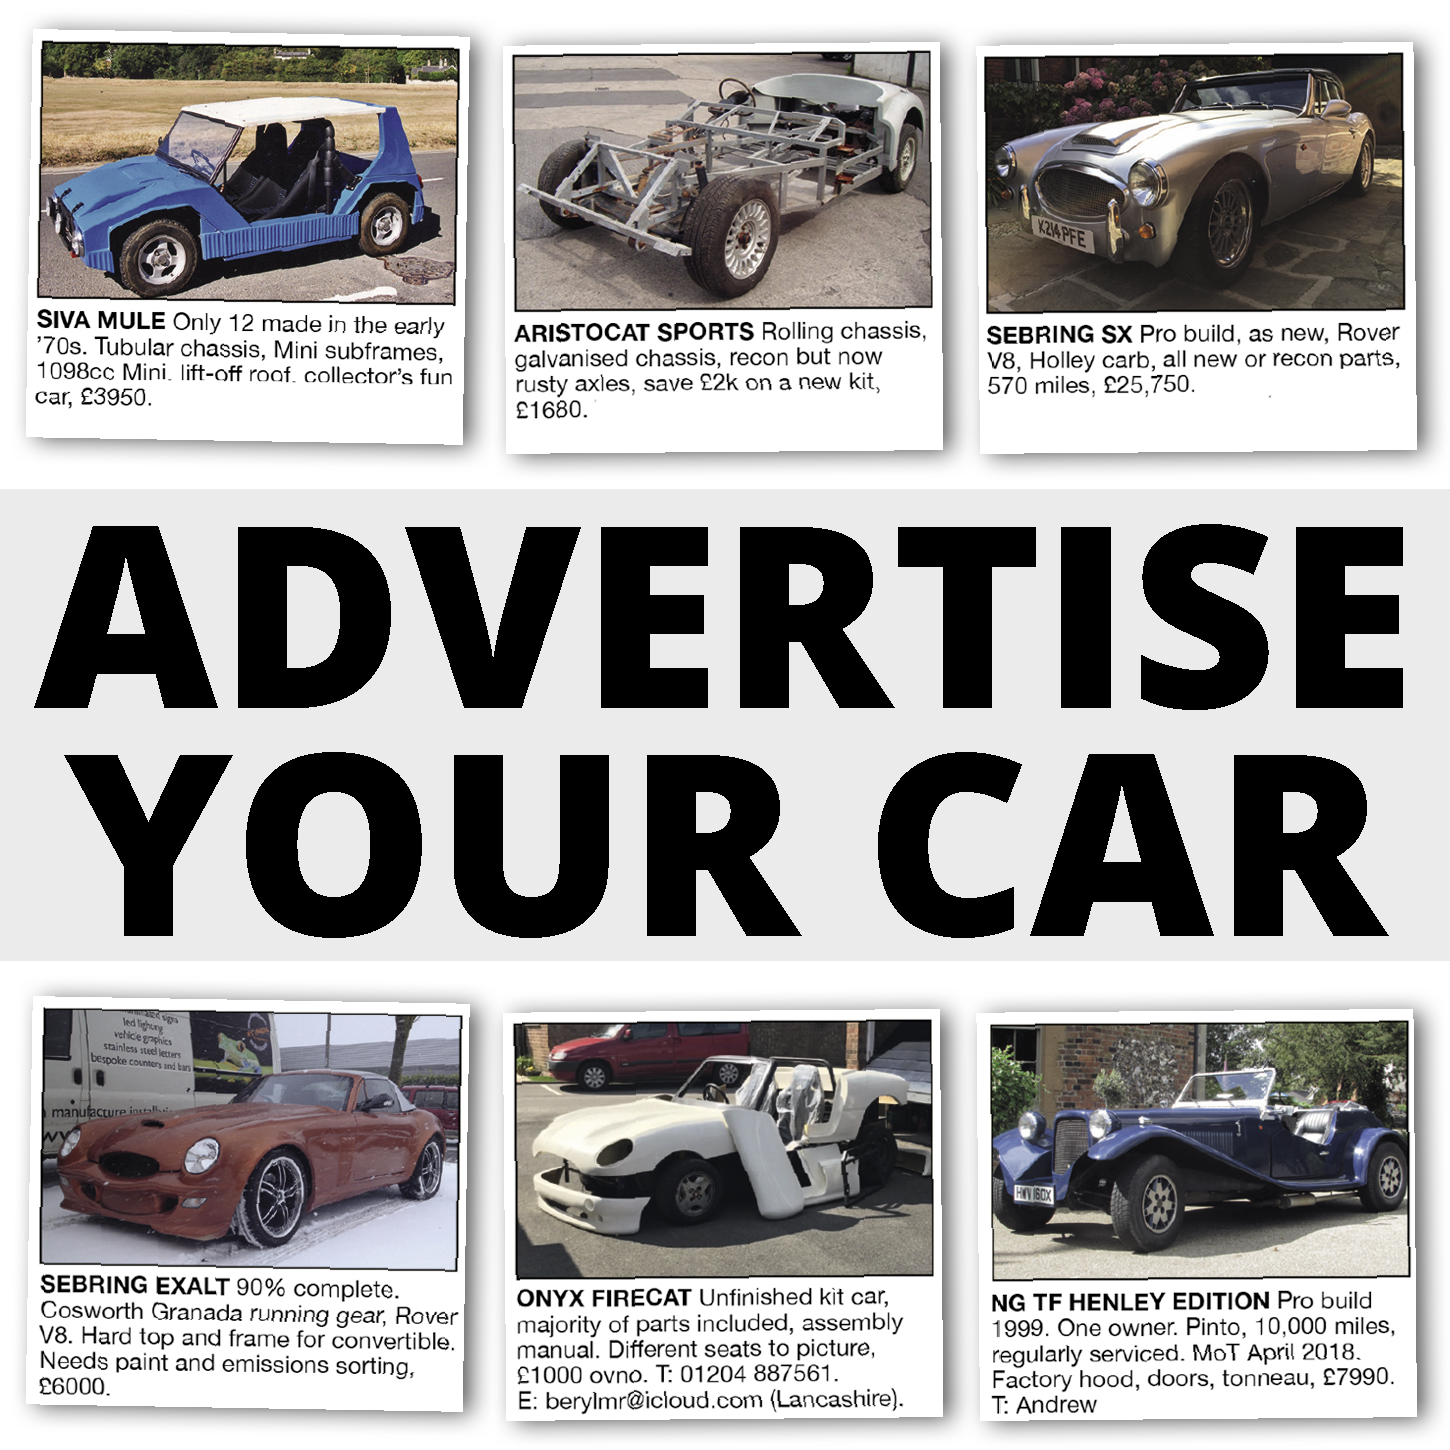 Advertise Your Car